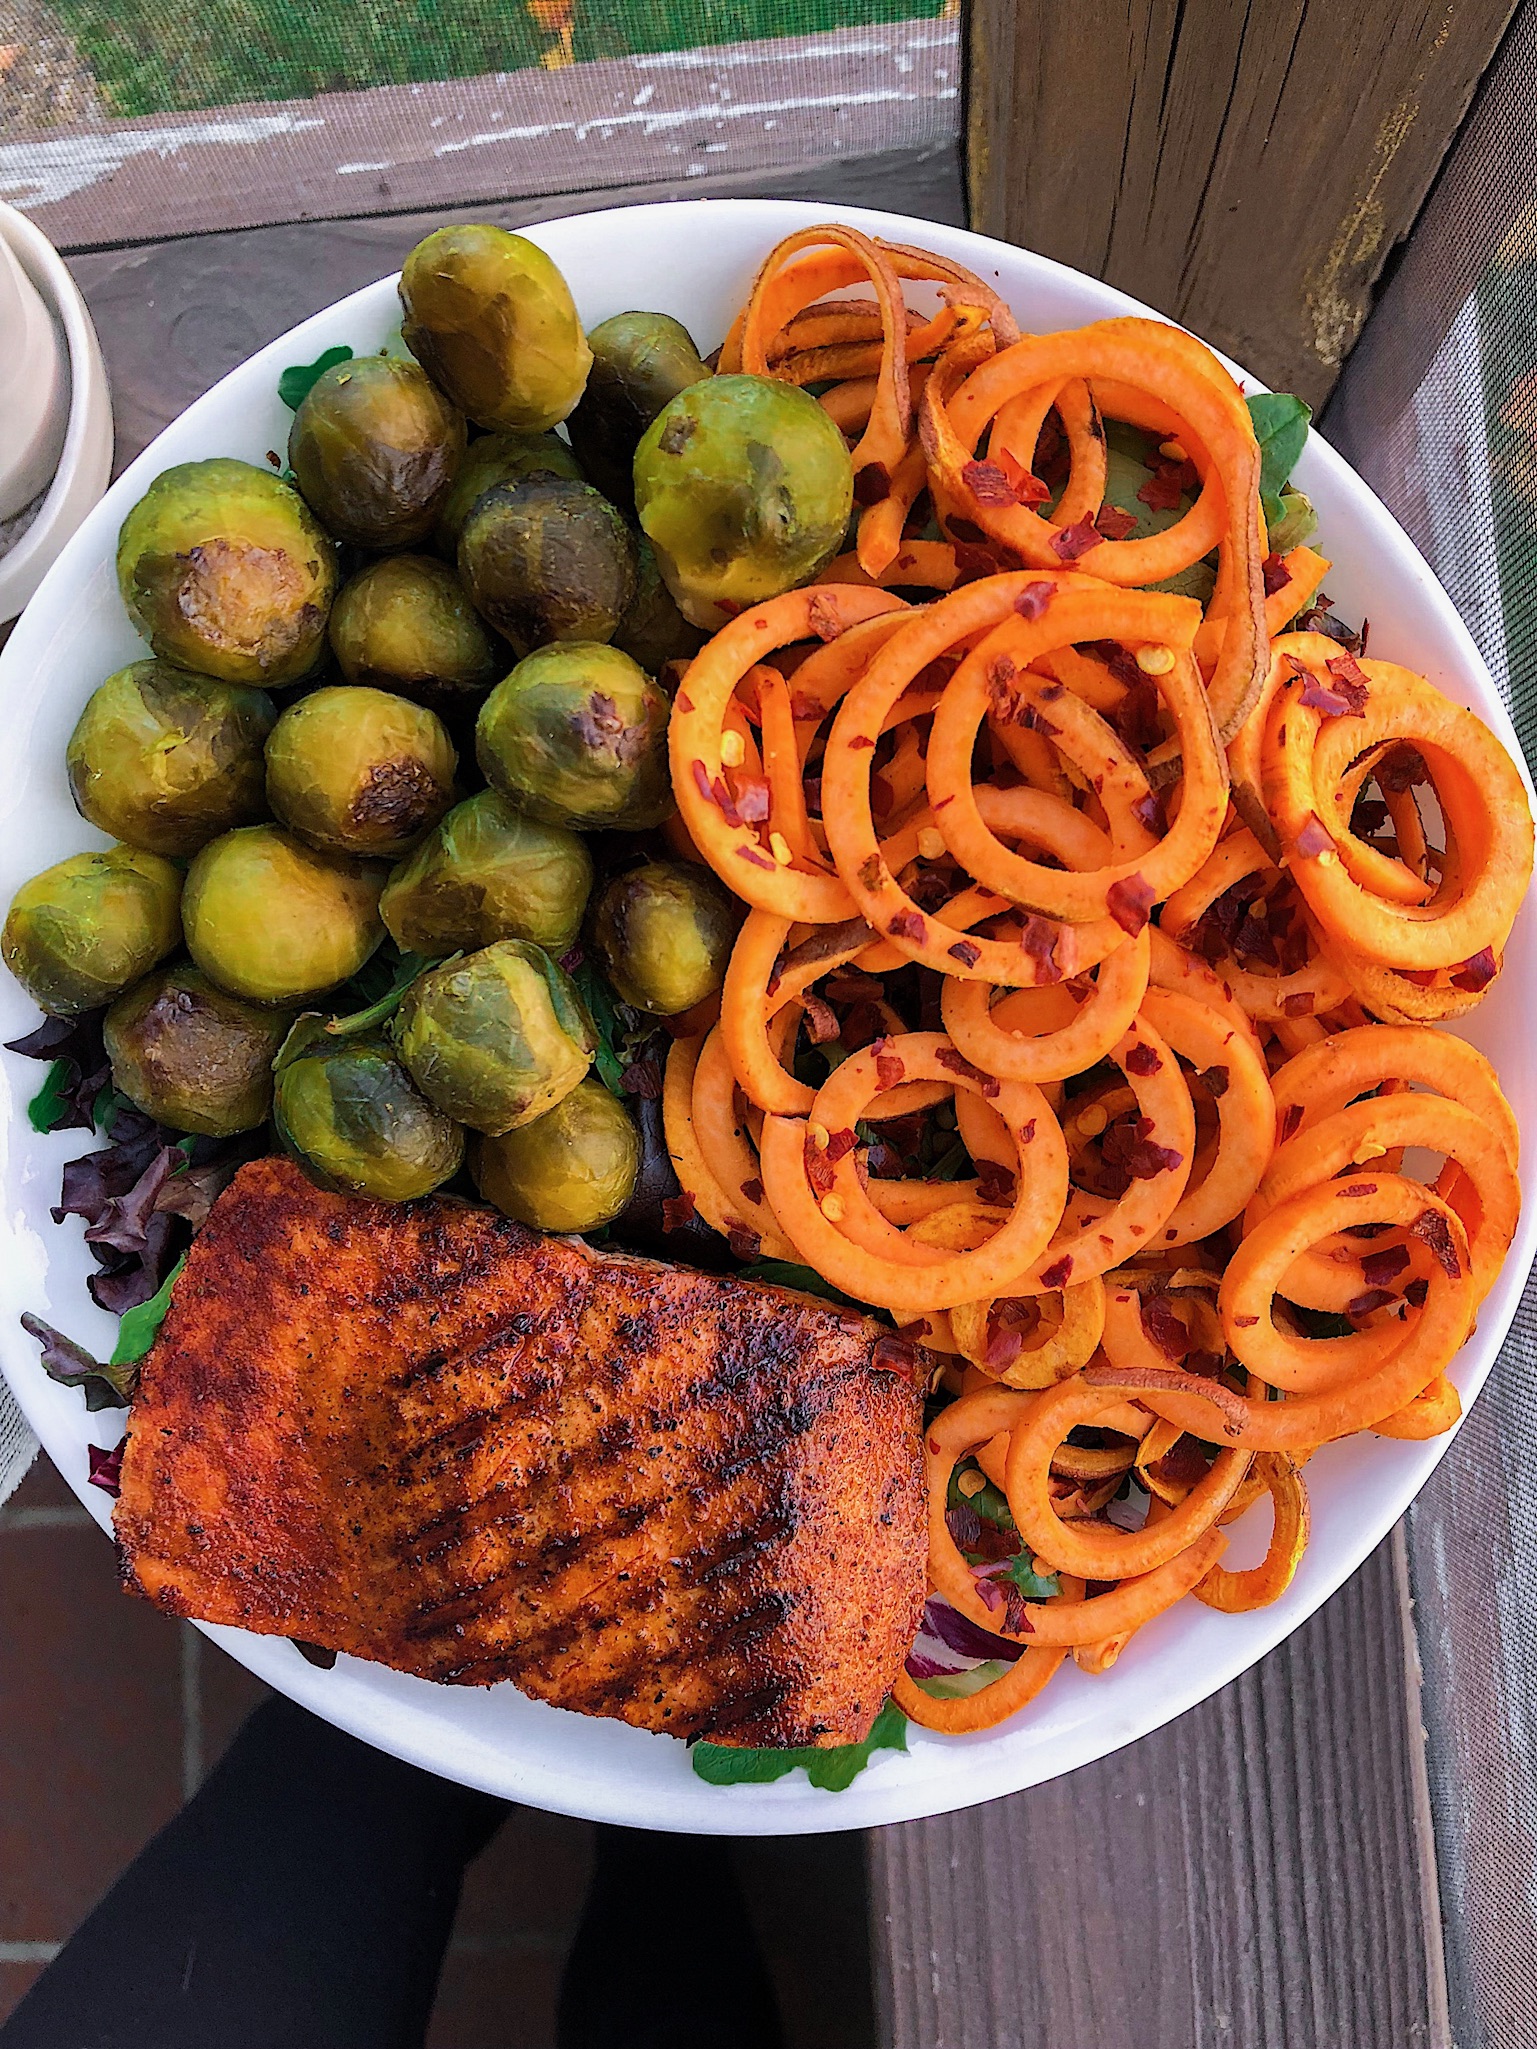 Sweet Potato Noodles, salmon, and brussel sprouts